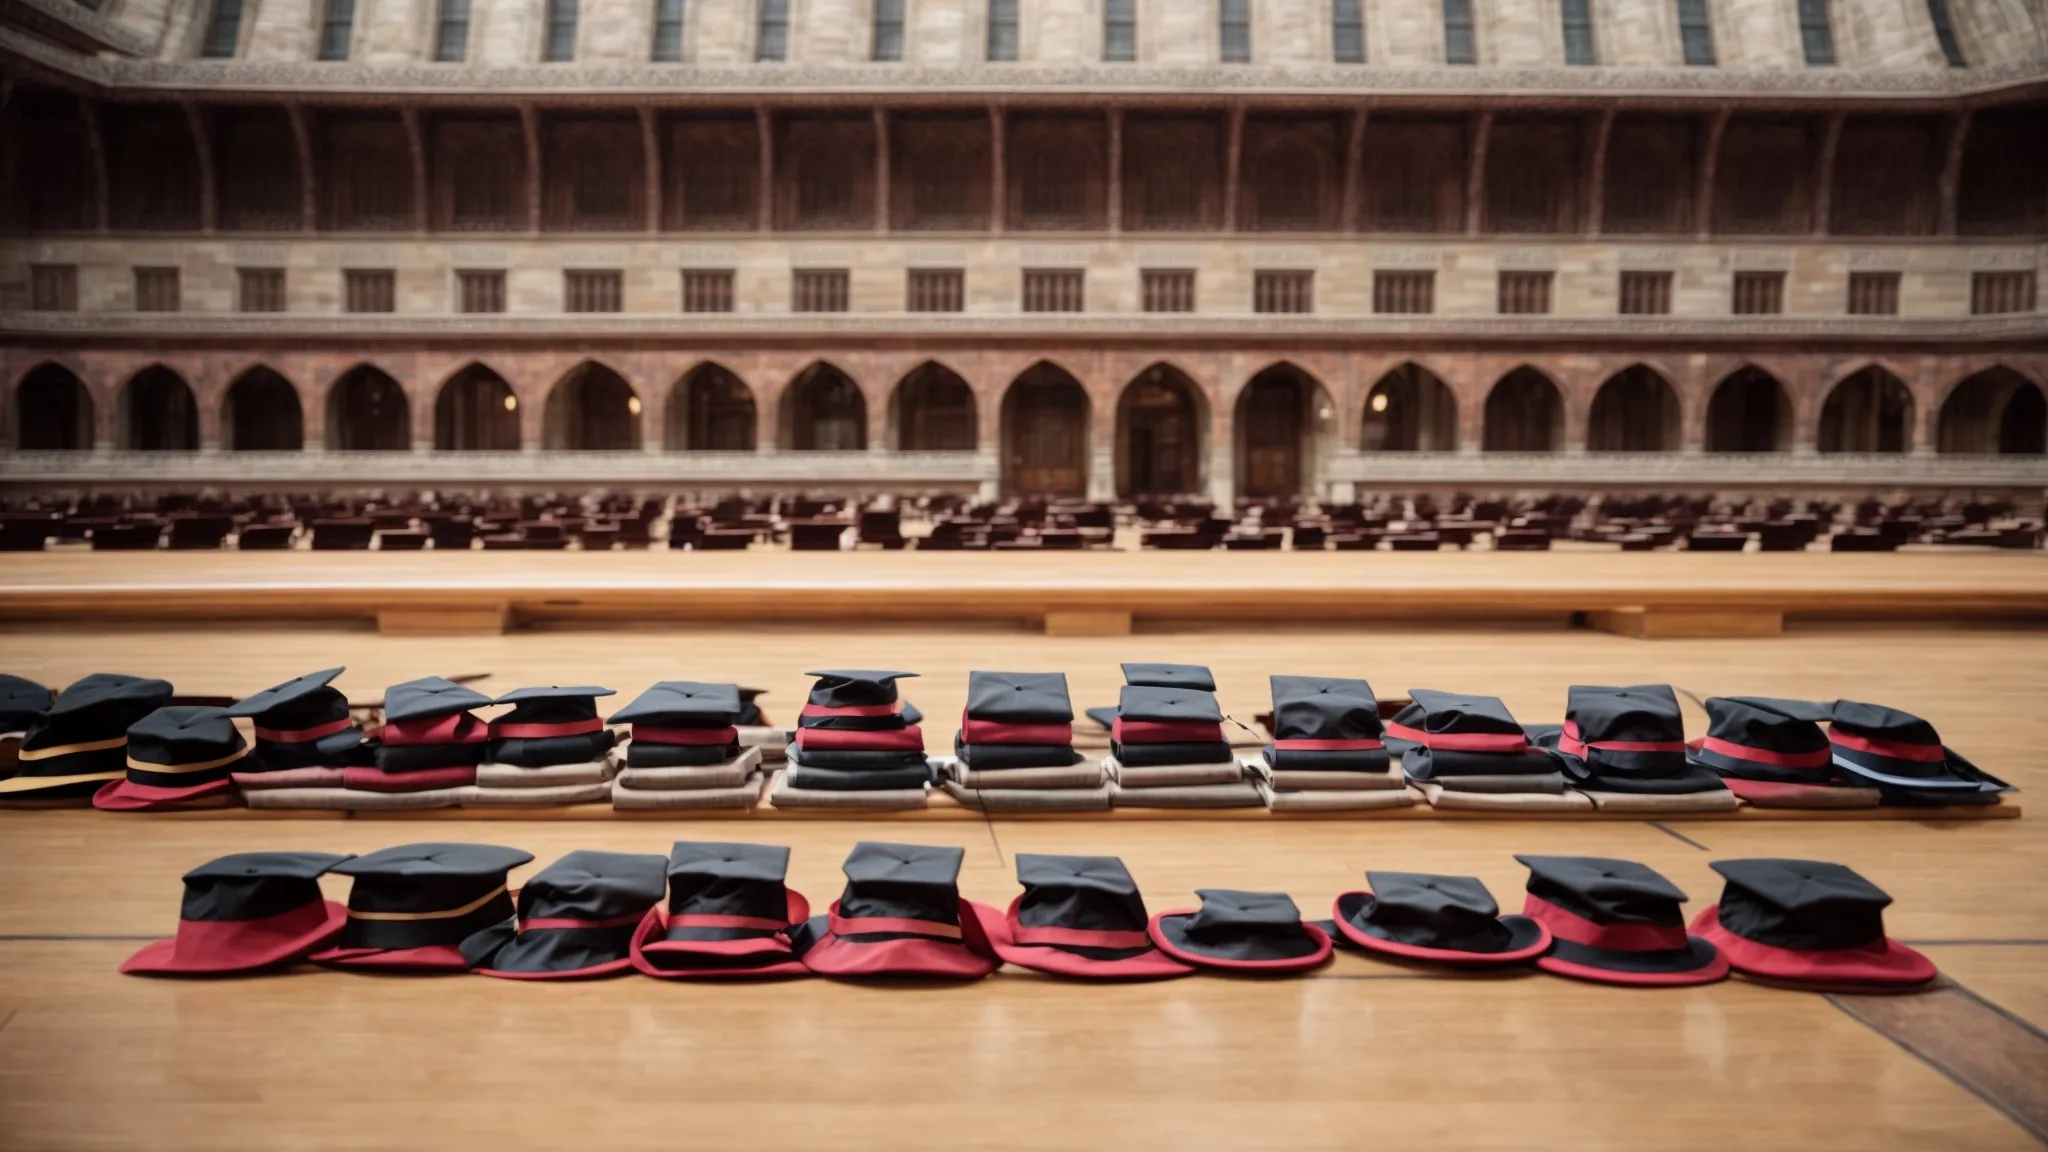 a row of distinguished academic caps lined up neatly against the backdrop of a university's grand hall.